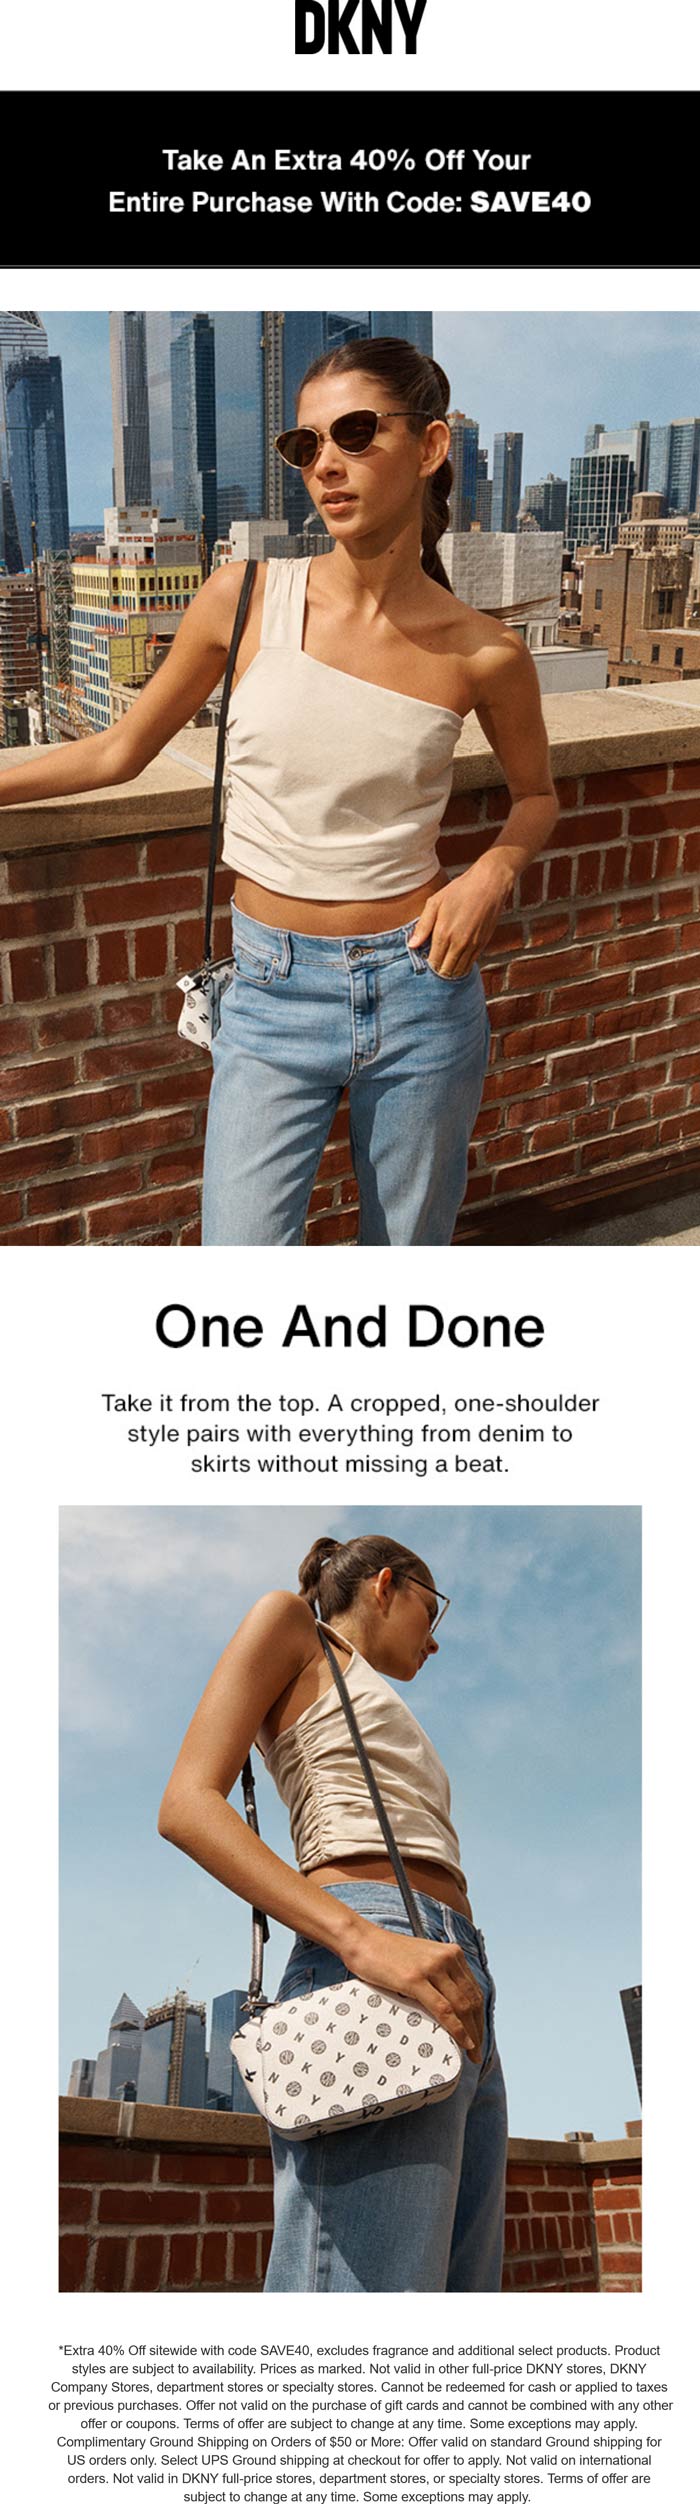 DKNY coupons & promo code for [December 2022]